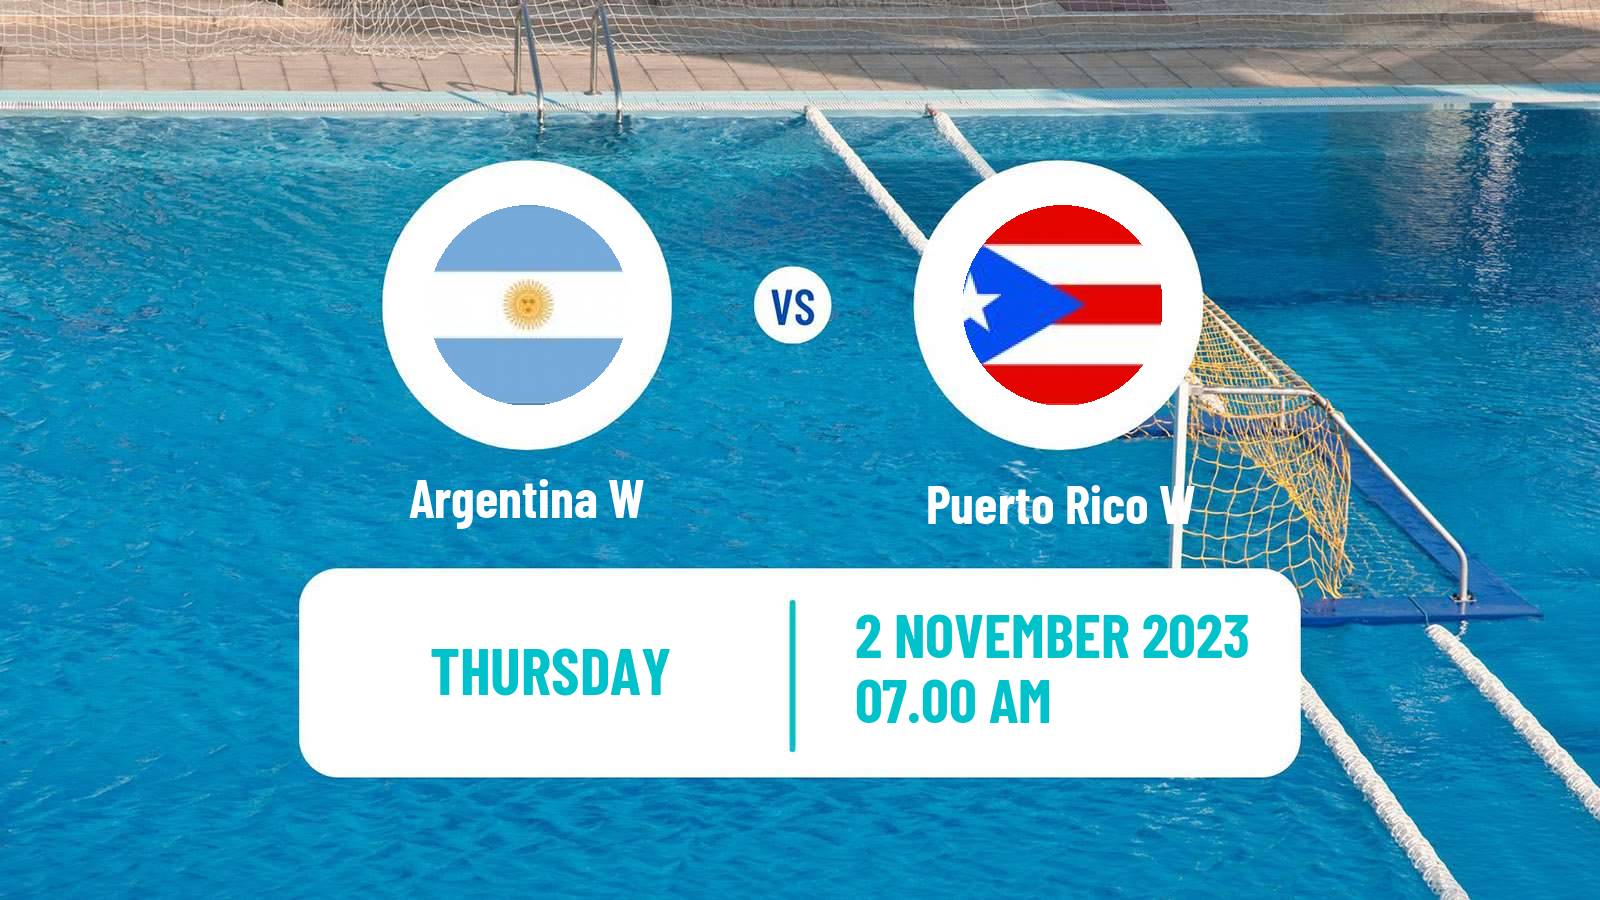 Water polo Pan American Games Water Polo Women Argentina W - Puerto Rico W